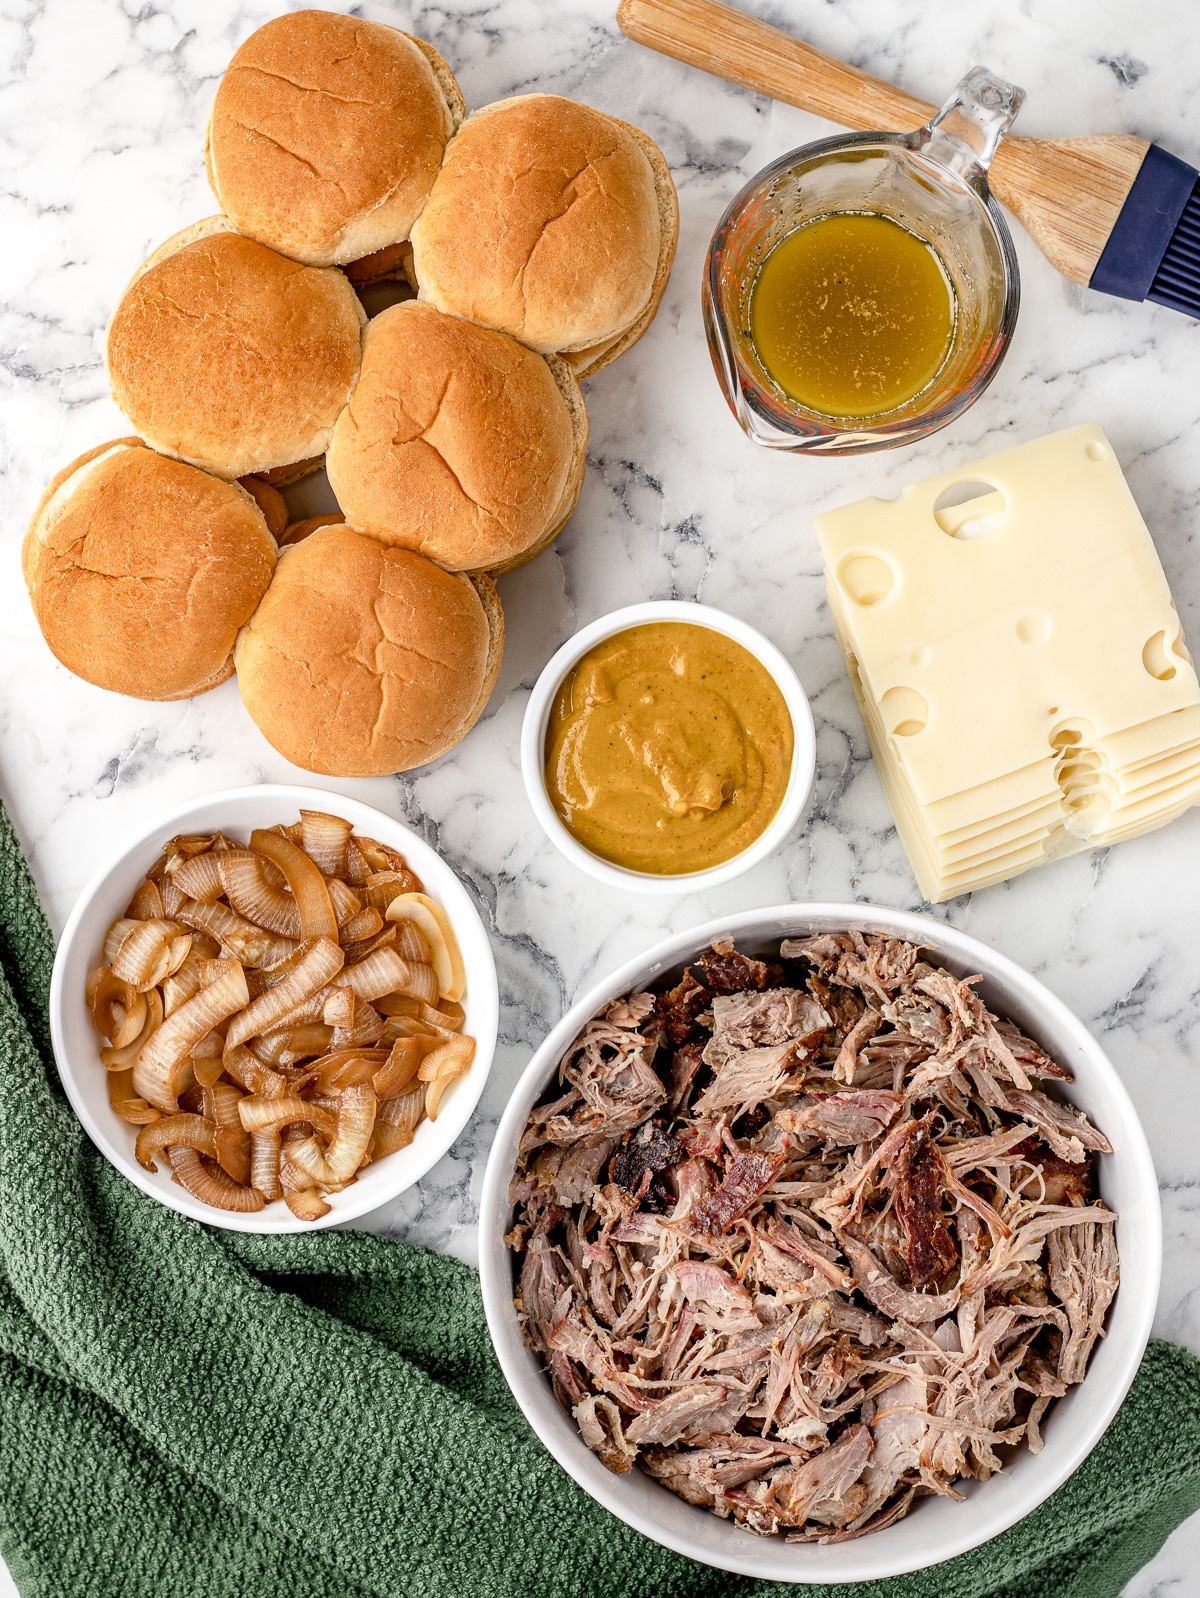 Ingredients. Slider buns, pulled pork, BBQ sauce, sauteed onions, swiss cheese, seasoned melted butter.